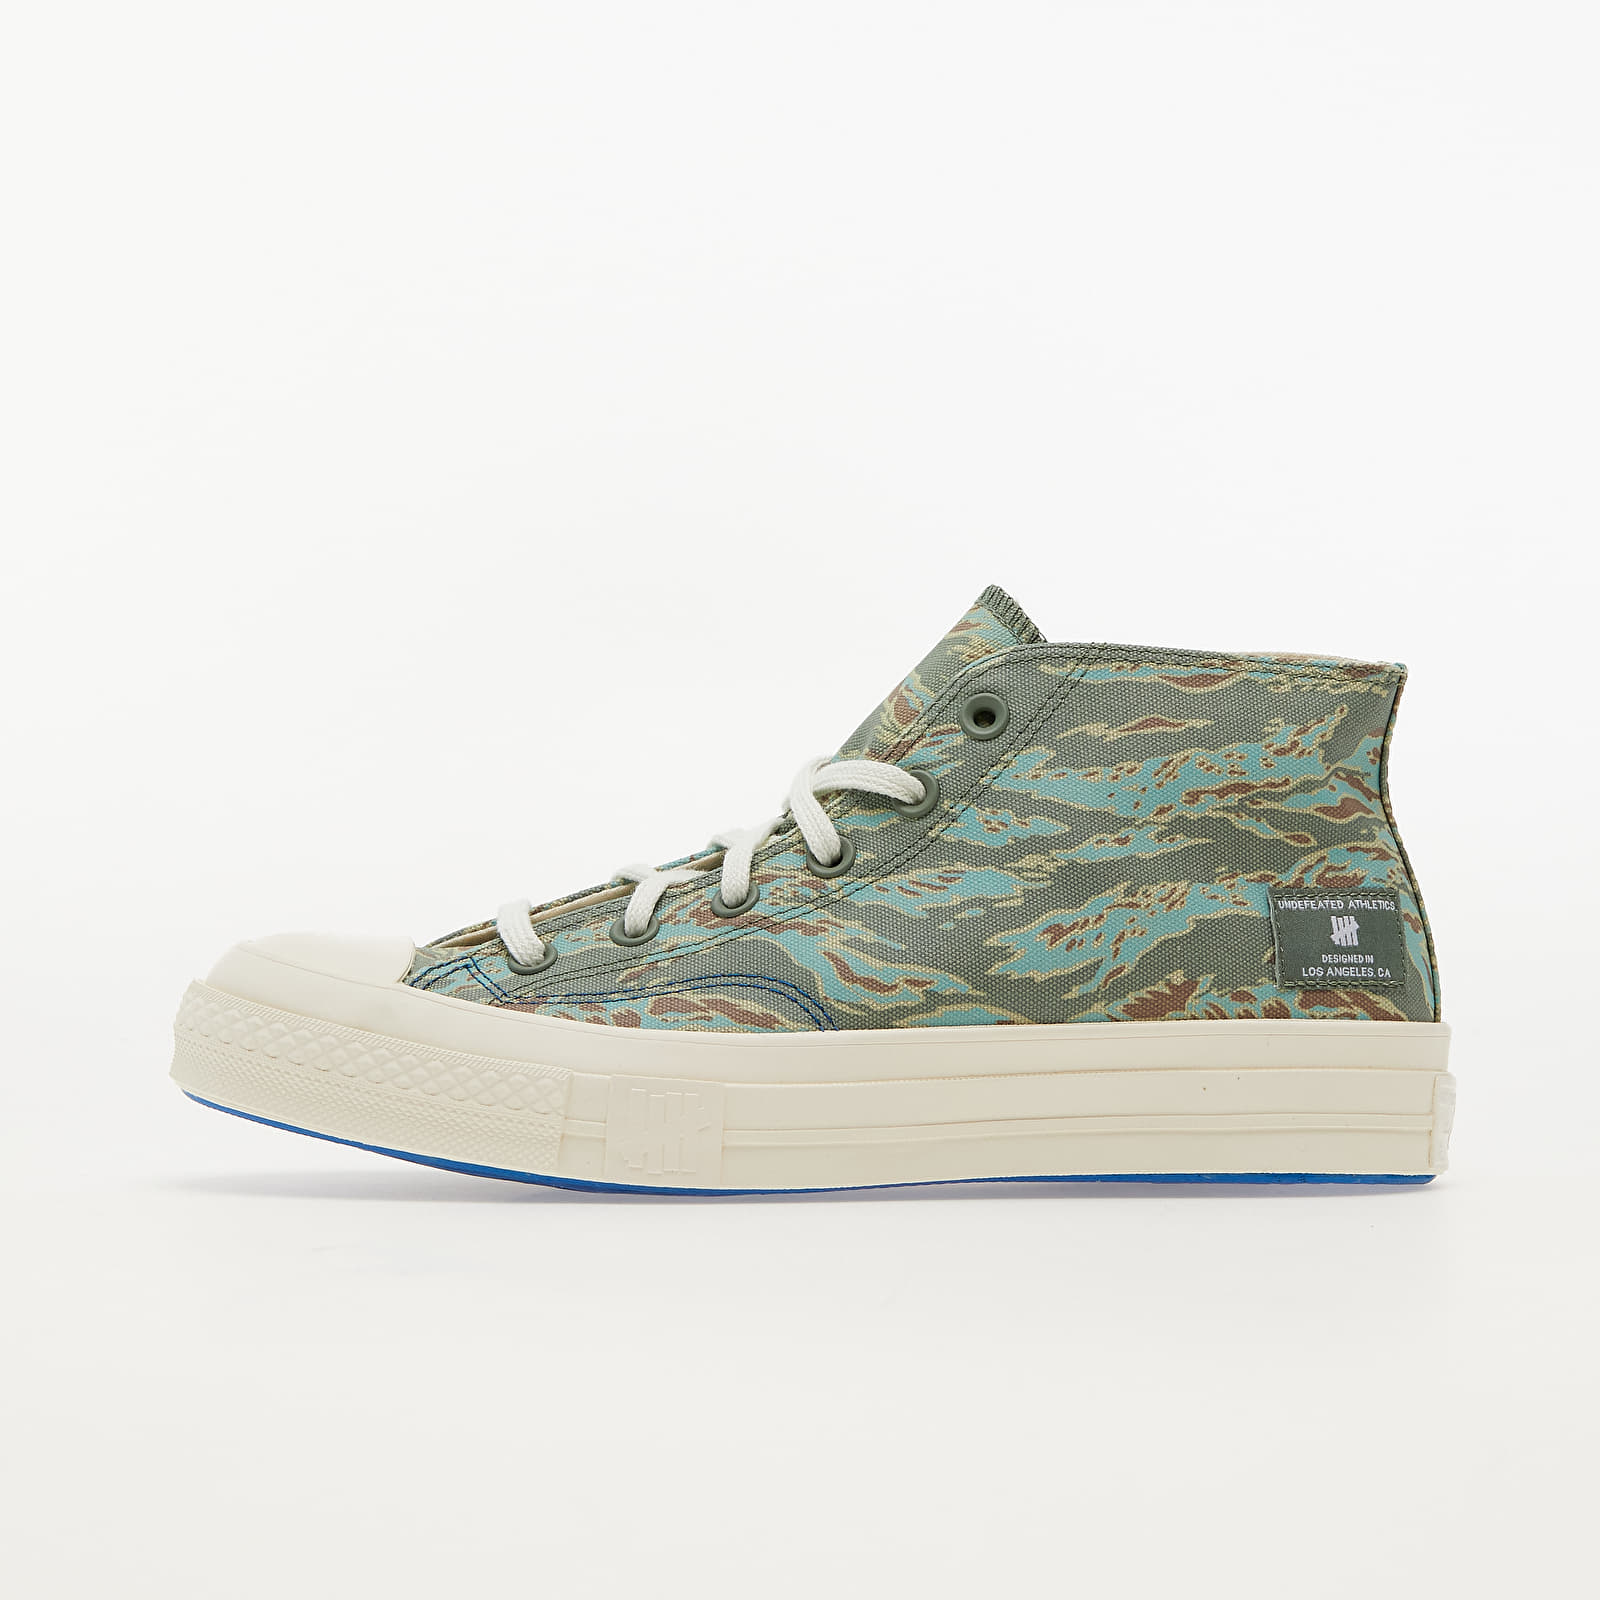 Men's shoes Converse x Undefeated Chuck 70 Mid Sea Spray/ Fossil